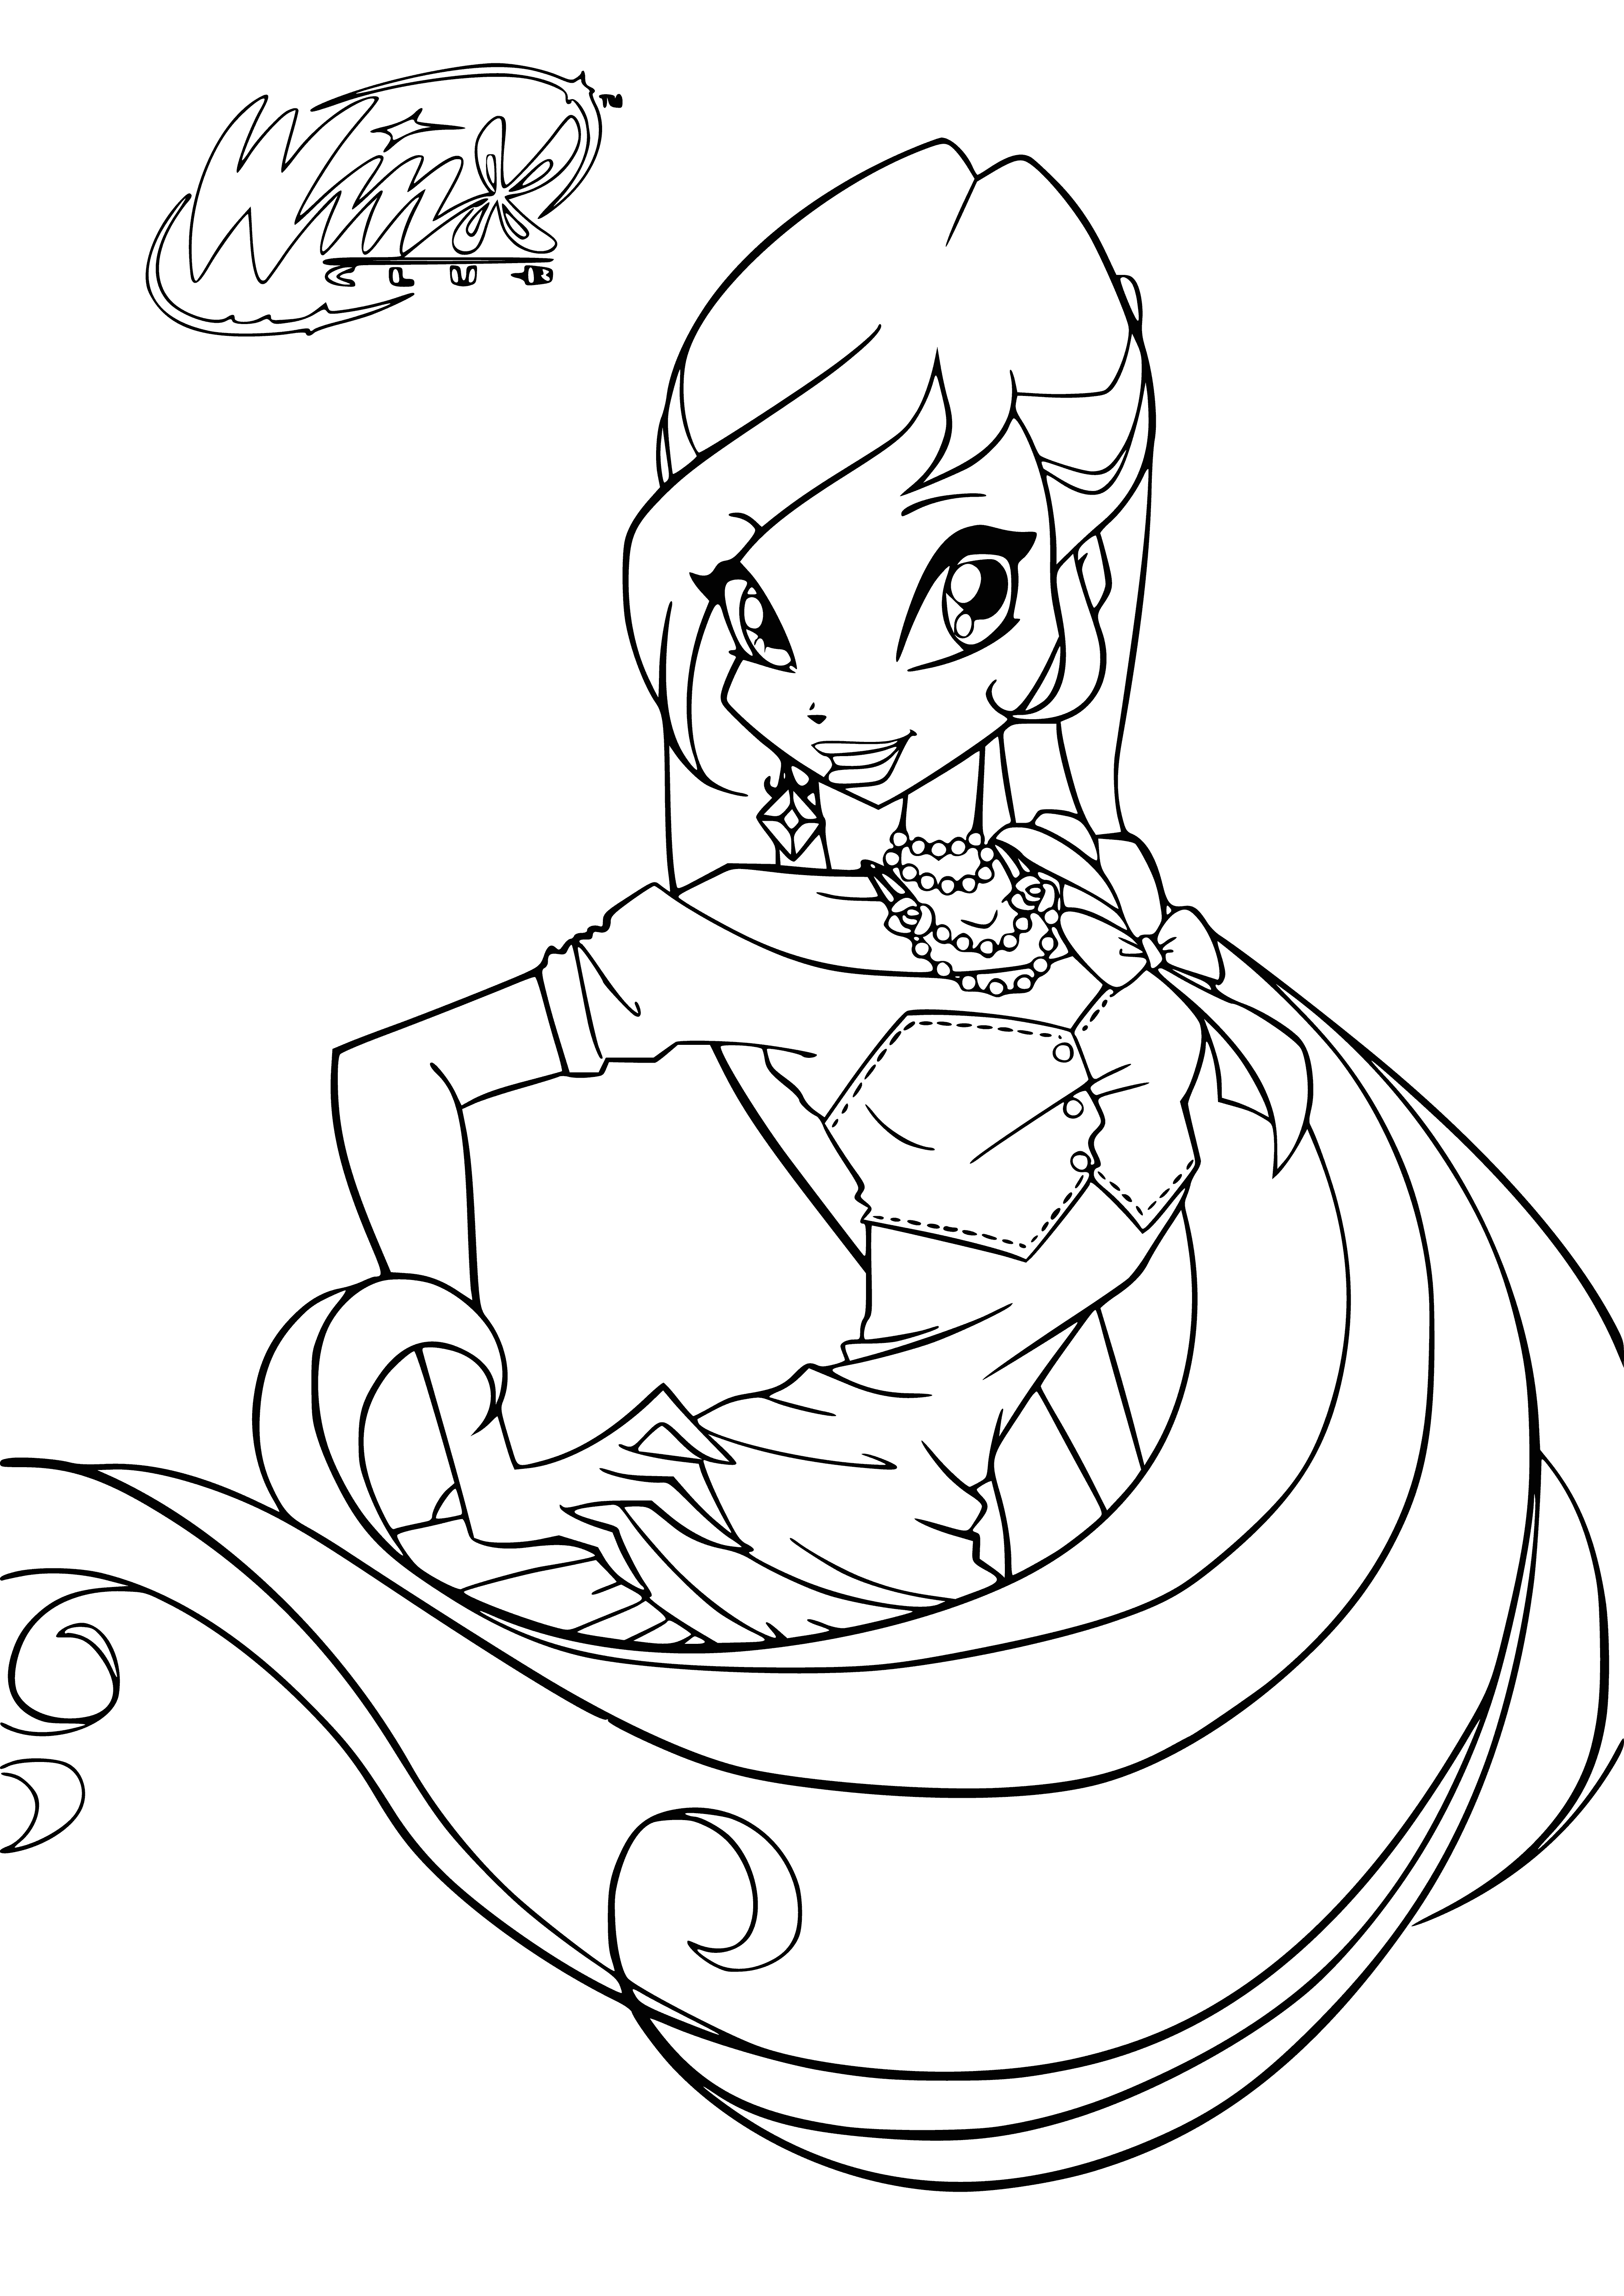 Woman in coloring page holds staff, outstretched hand, long purple hair, serious face, wearing purple robe.